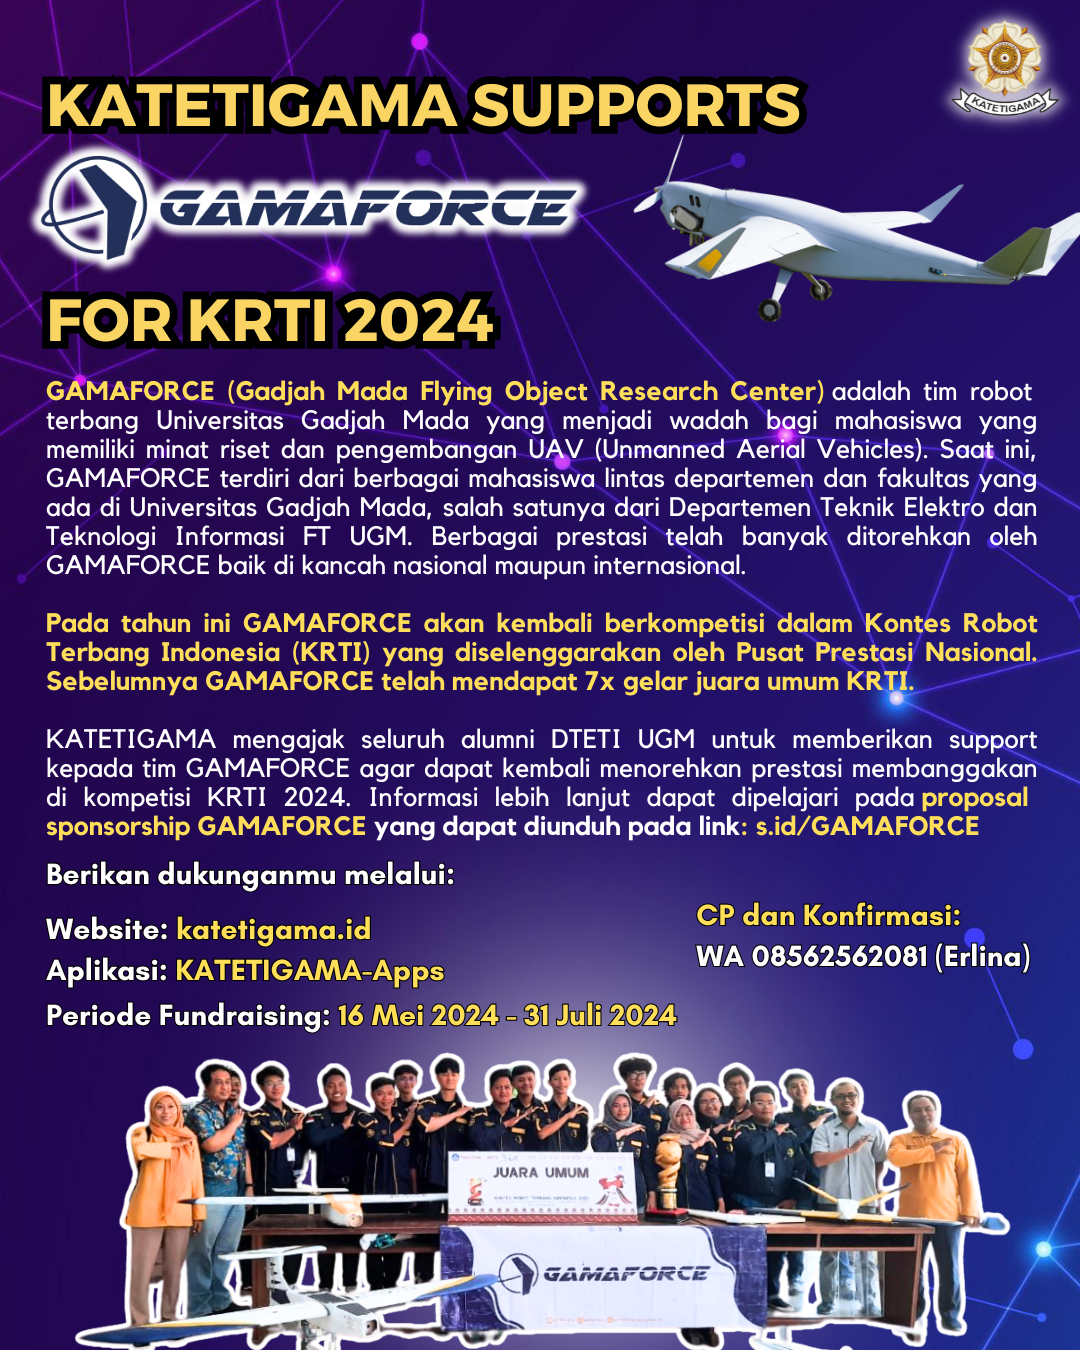 Campaign - KATETIGAMA Supports GAMAFORCE for KRTI 2024